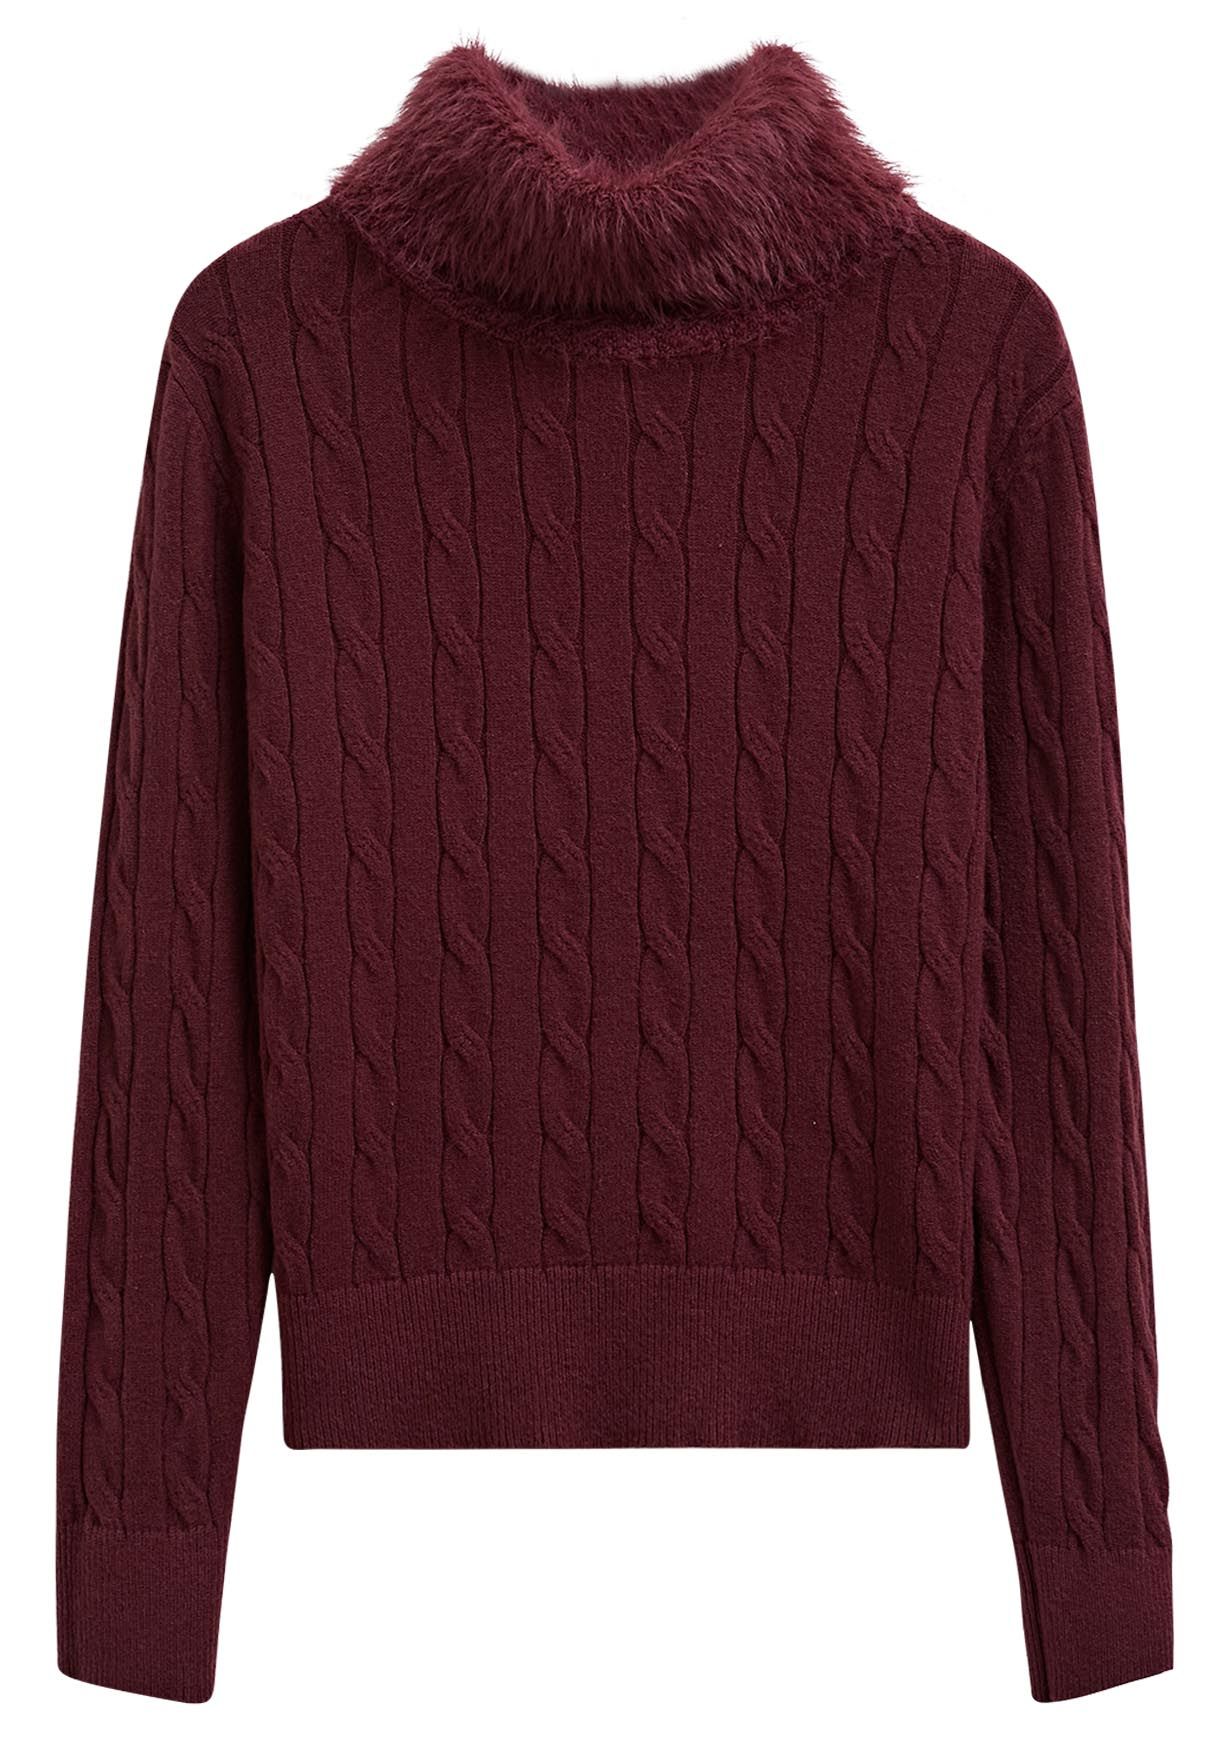 Soft Fuzzy Turtleneck Cable Knit Sweater in Burgundy